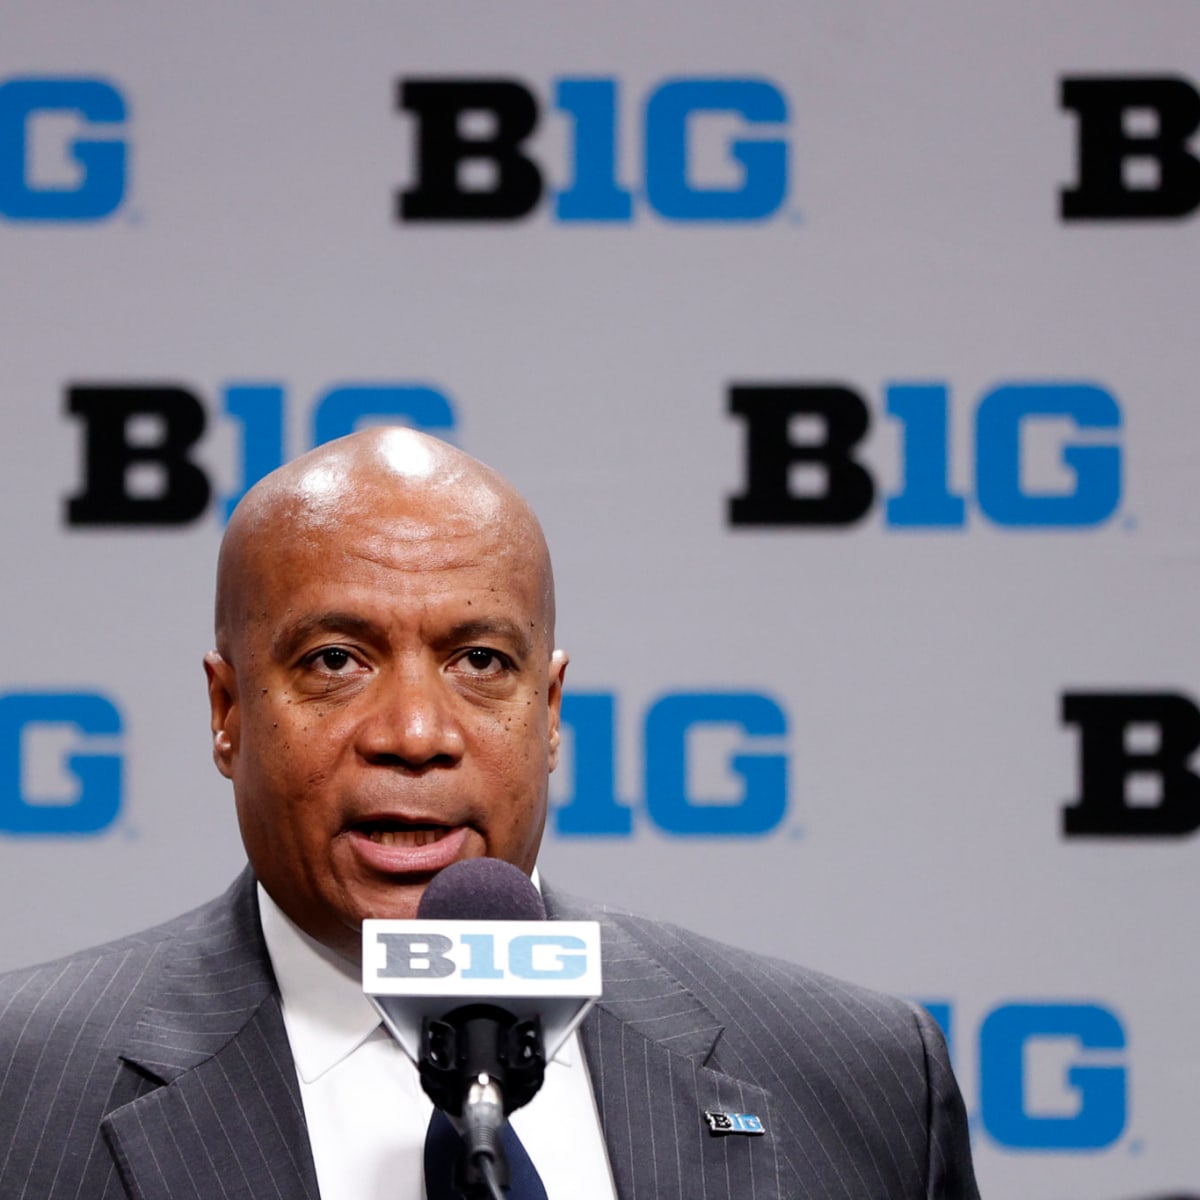 If the Big Ten expands to 24 teams, what six schools would you want